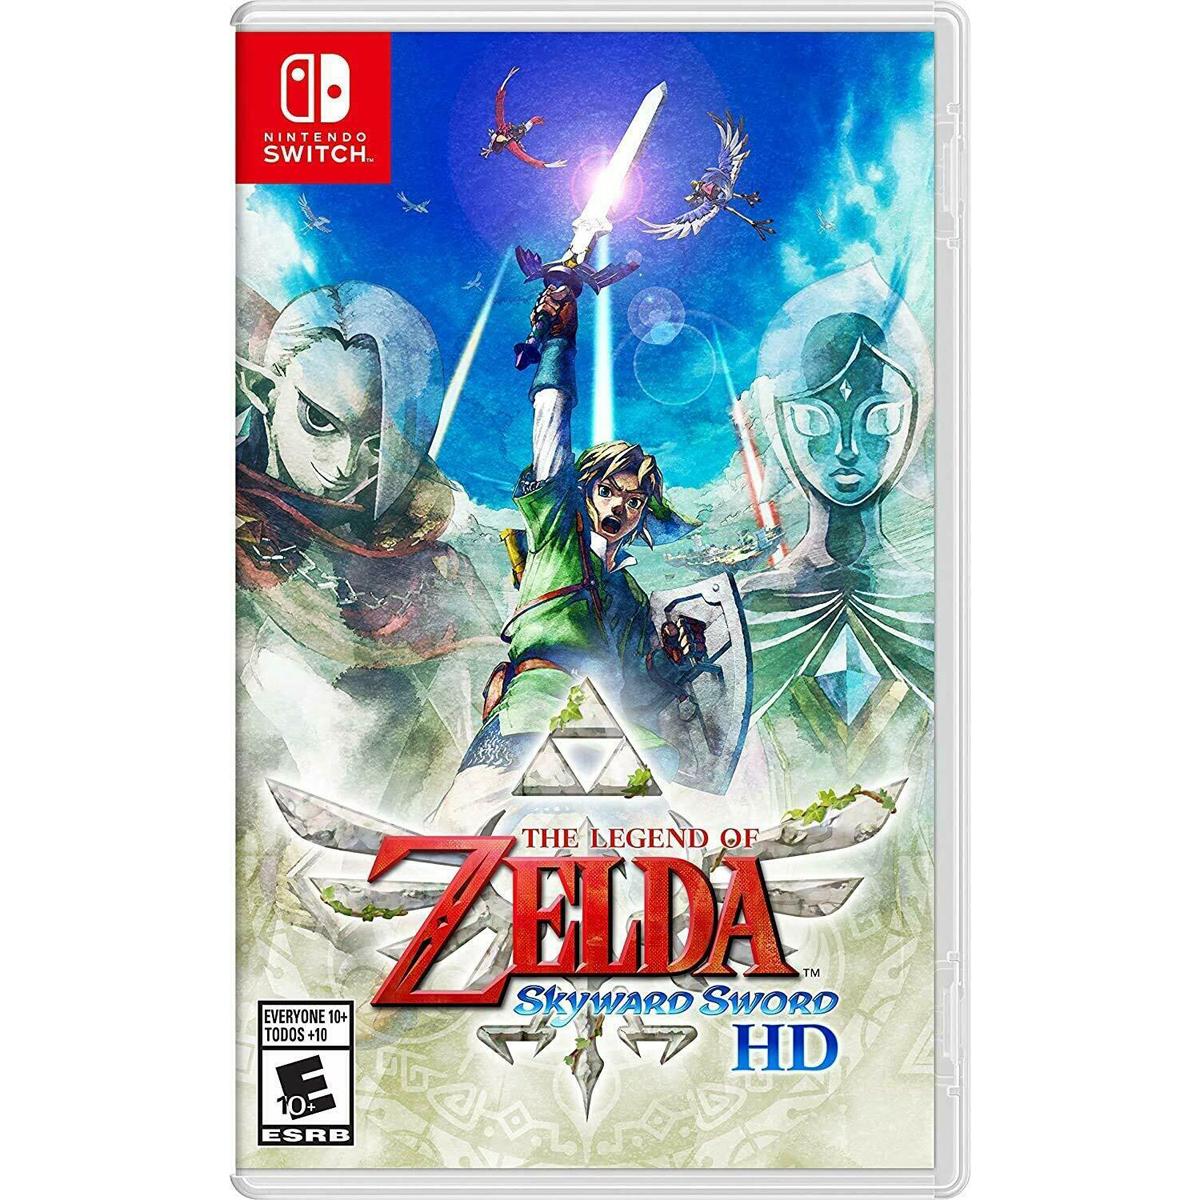 The Legend of Zelda Skyward Sword Switch for $49.99 Shipped